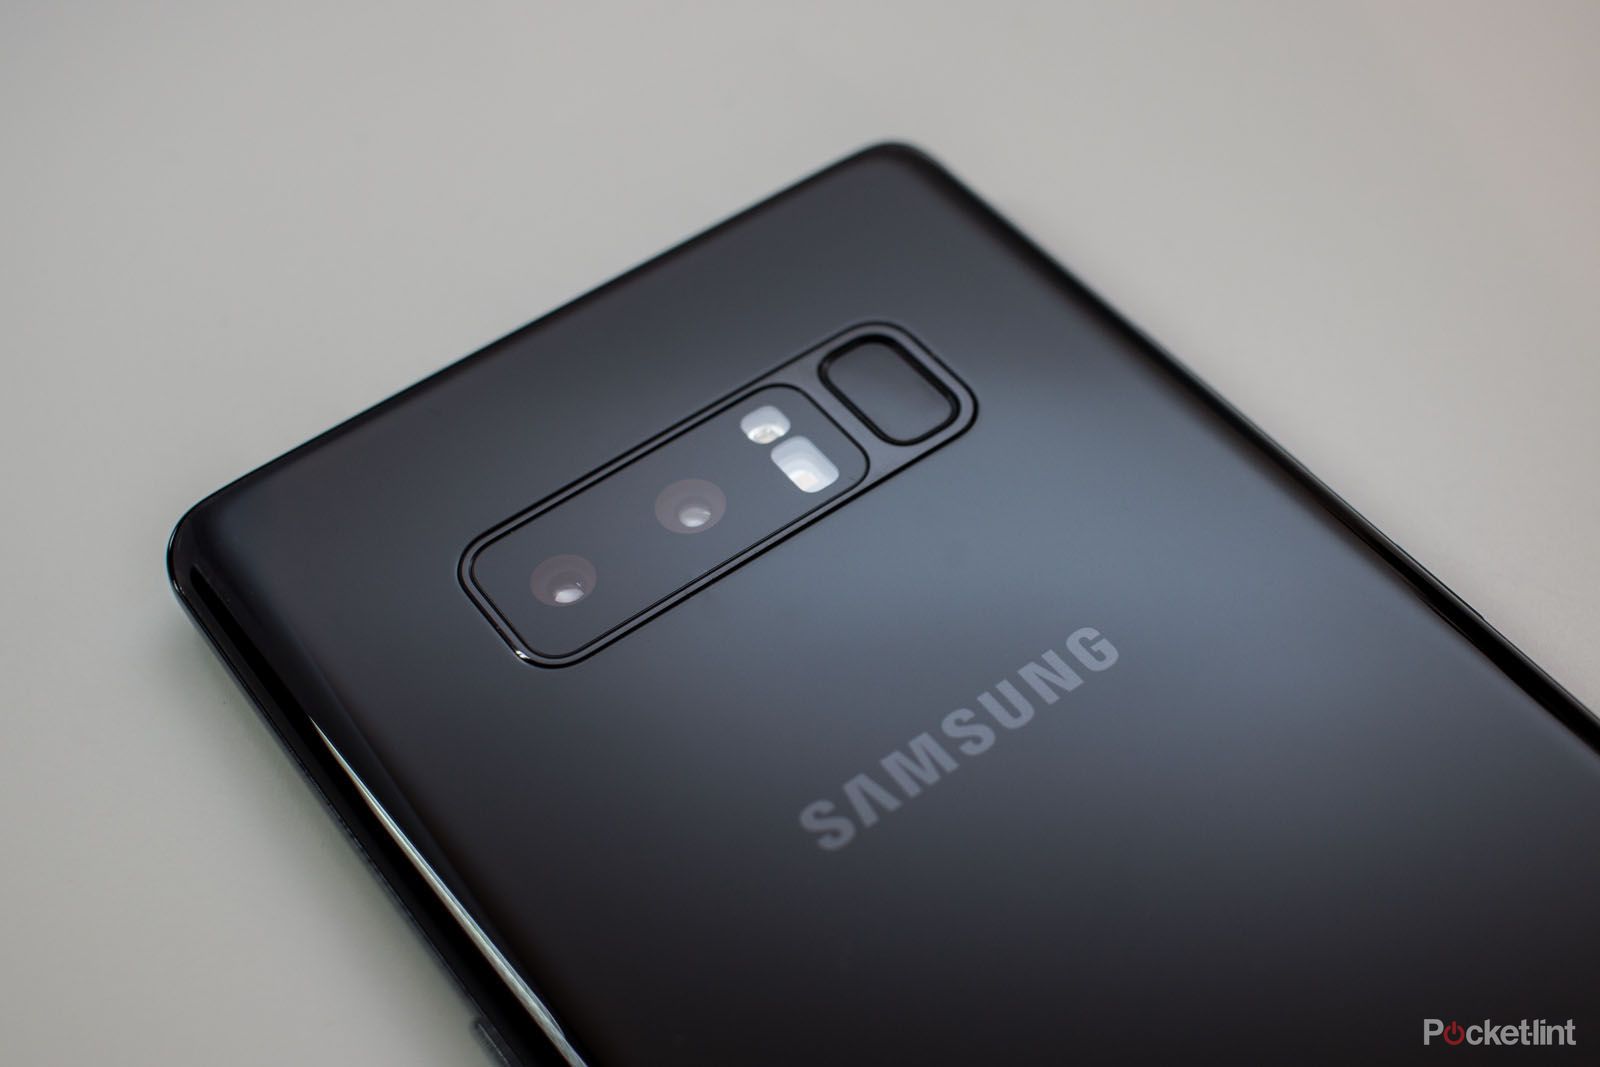 Samsung Galaxy Note 8 tips and tricks image 2